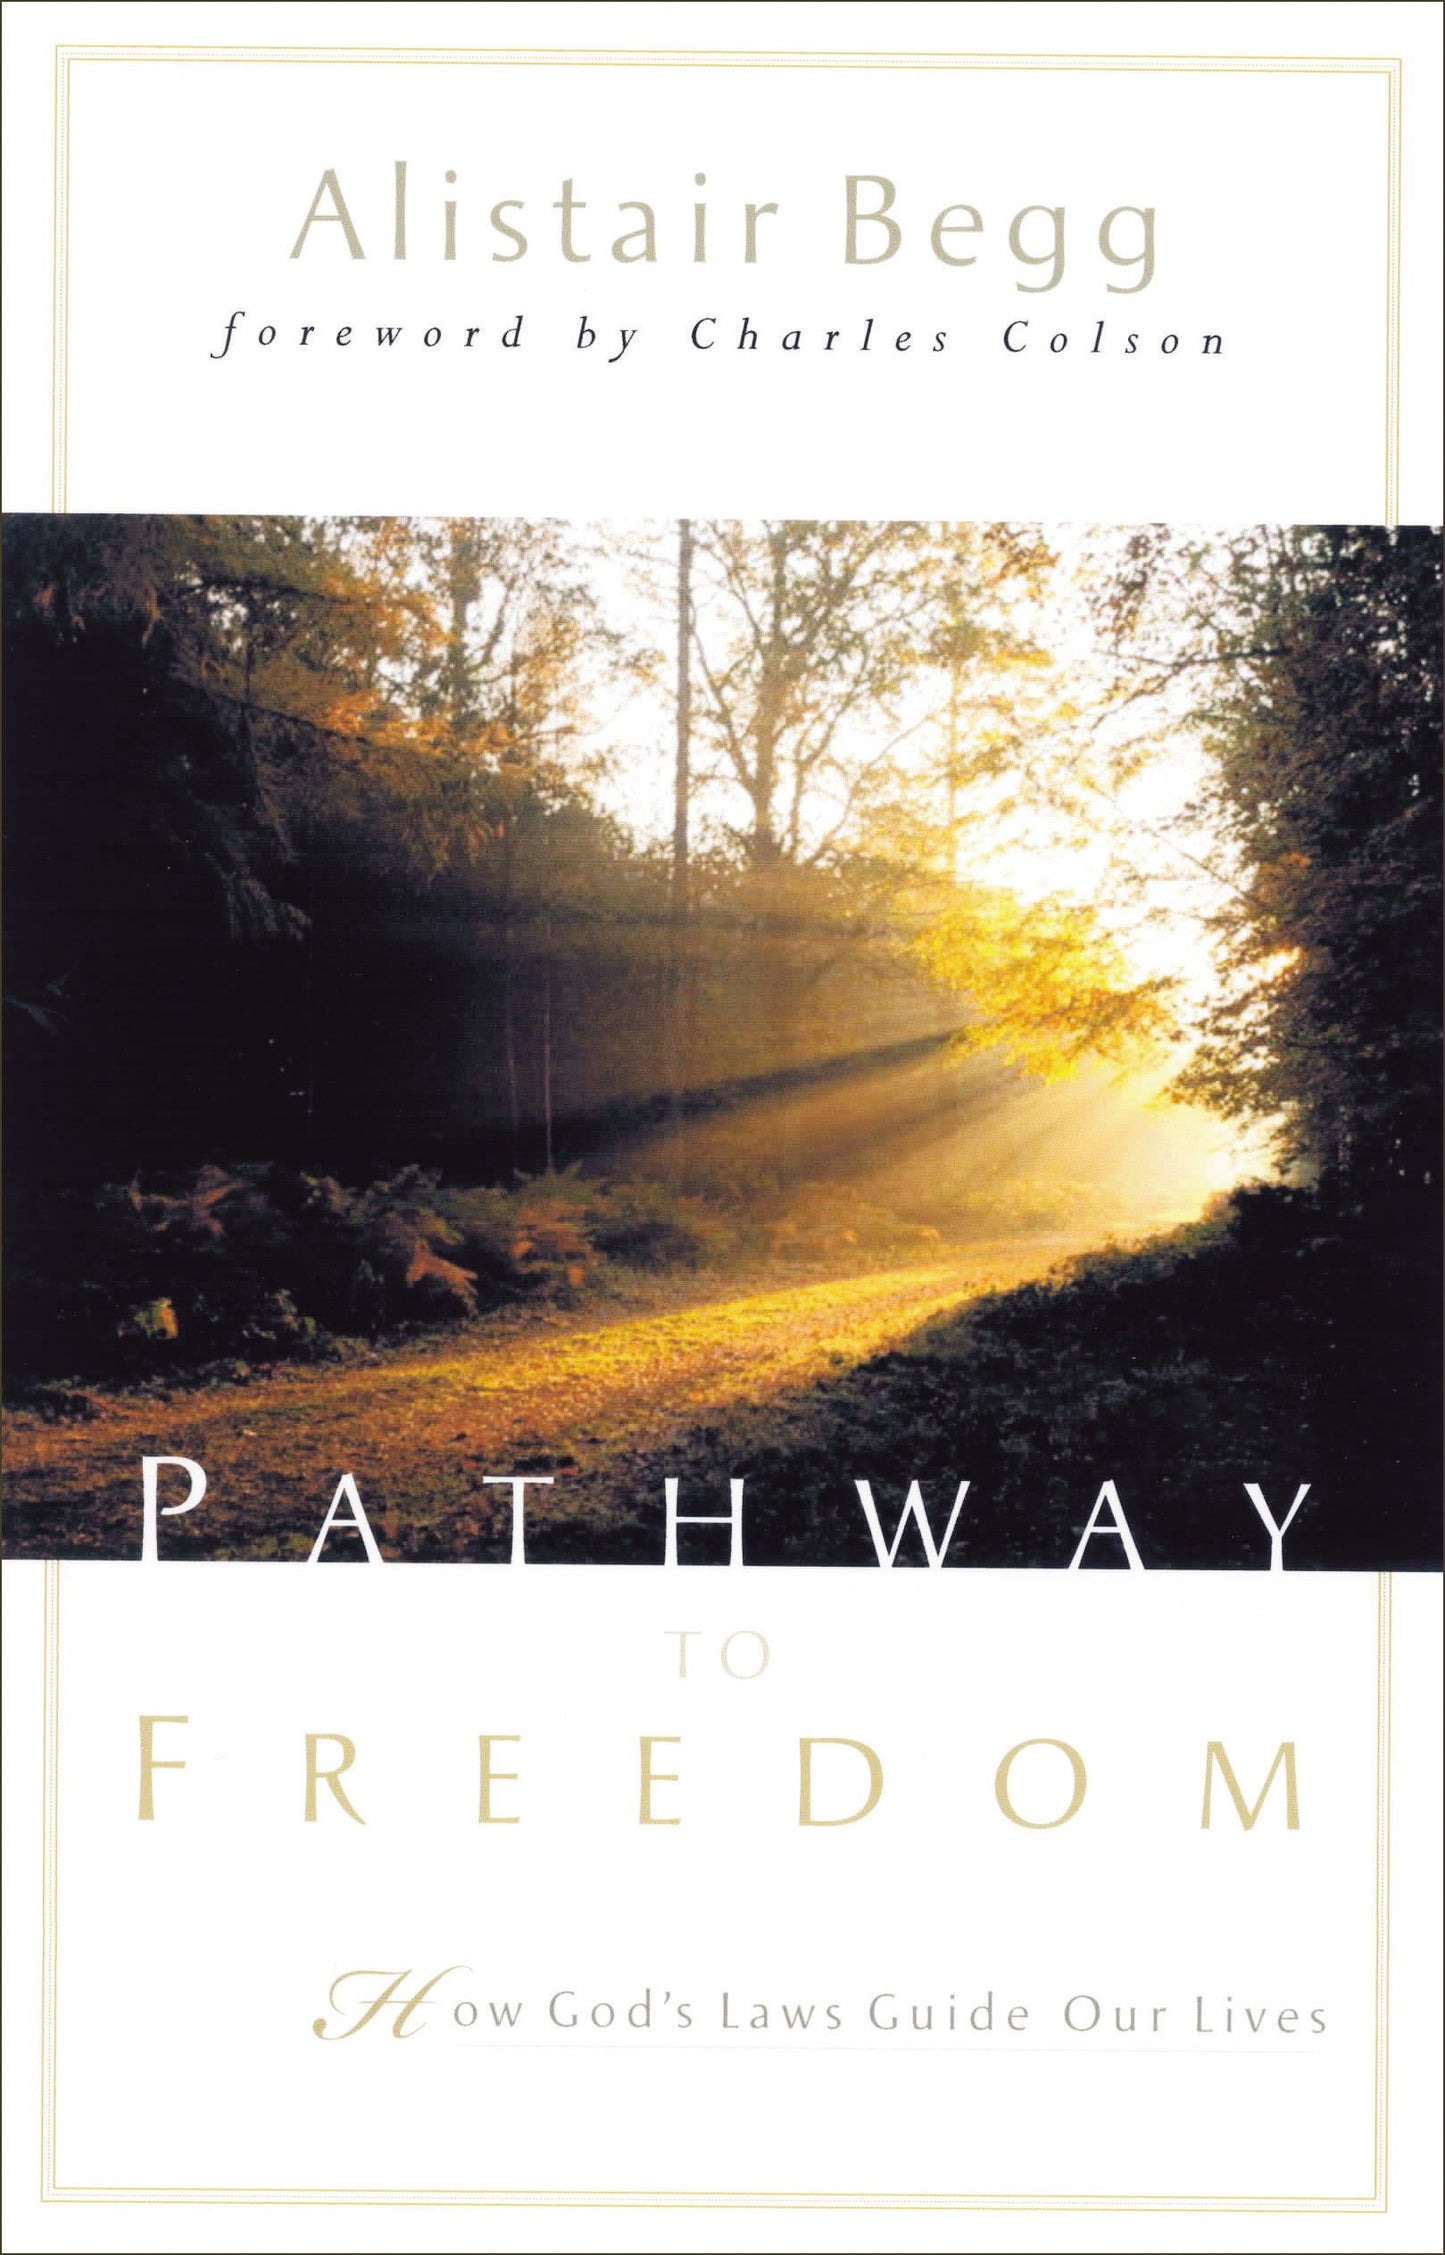 Pathway to Freedom: How God's Laws Guide Our Lives